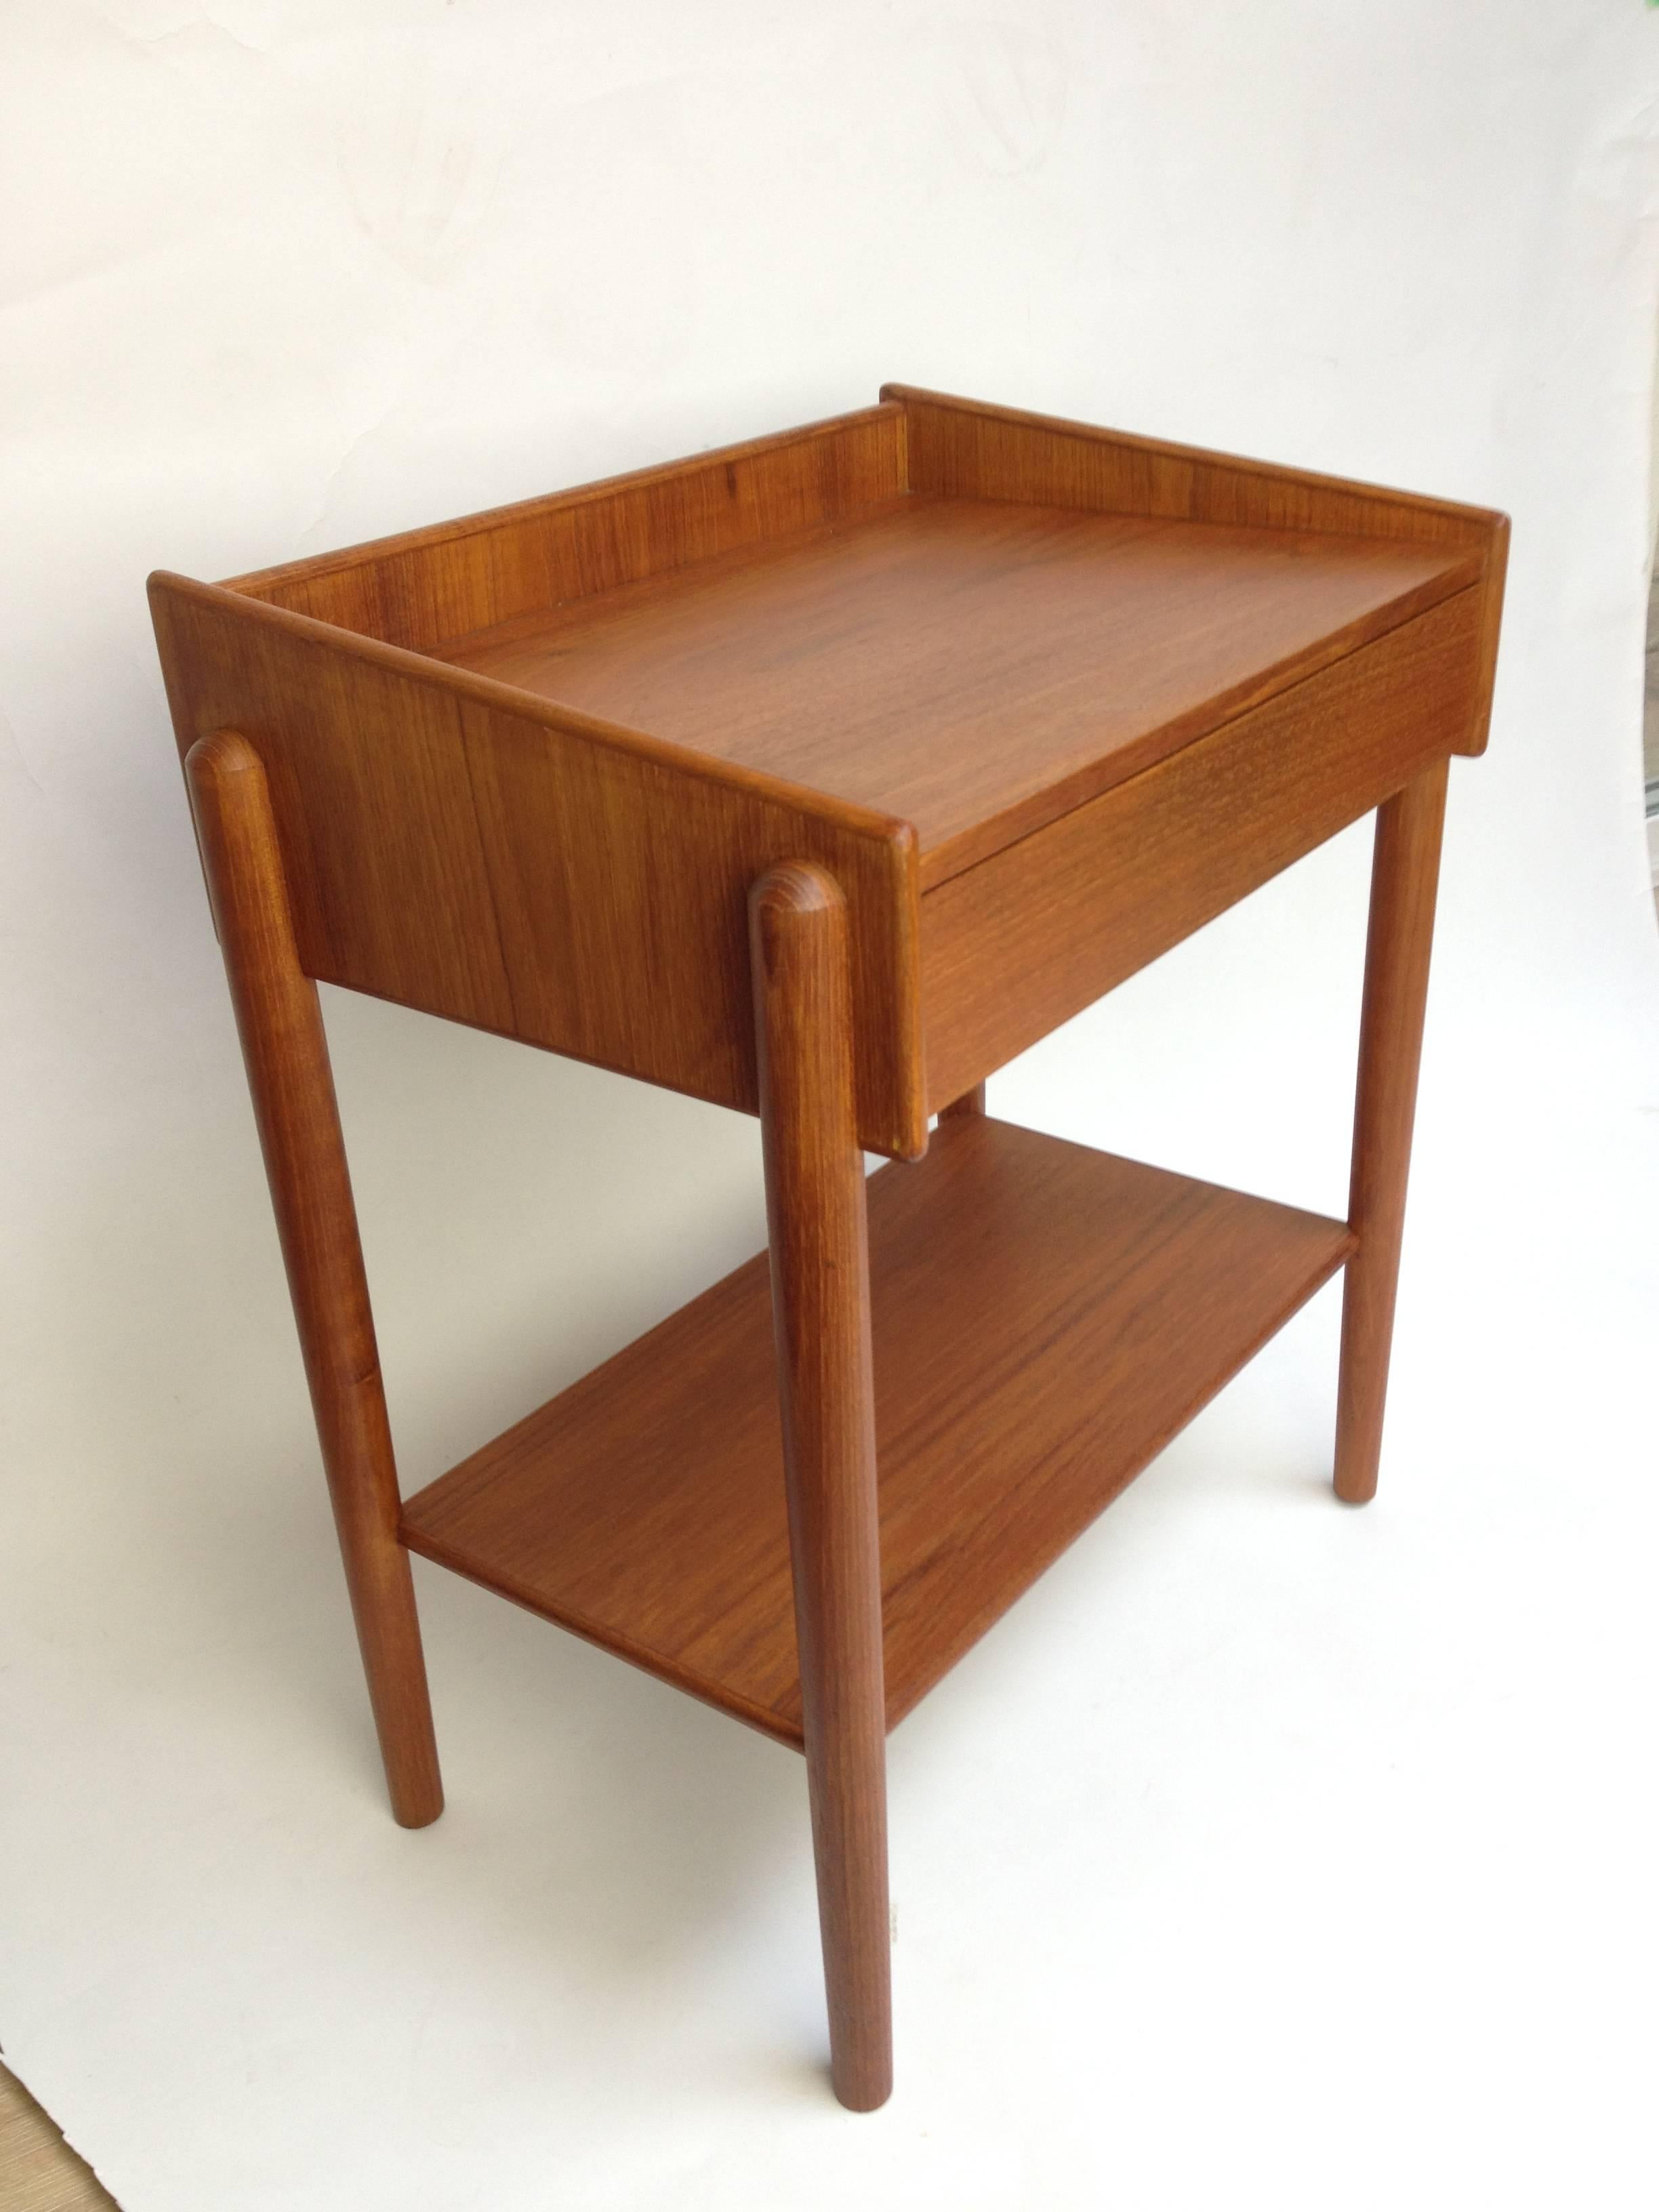 Mid-20th Century 1950s Børge Mogensen Teak Bedside Table with Drawer by Soborg